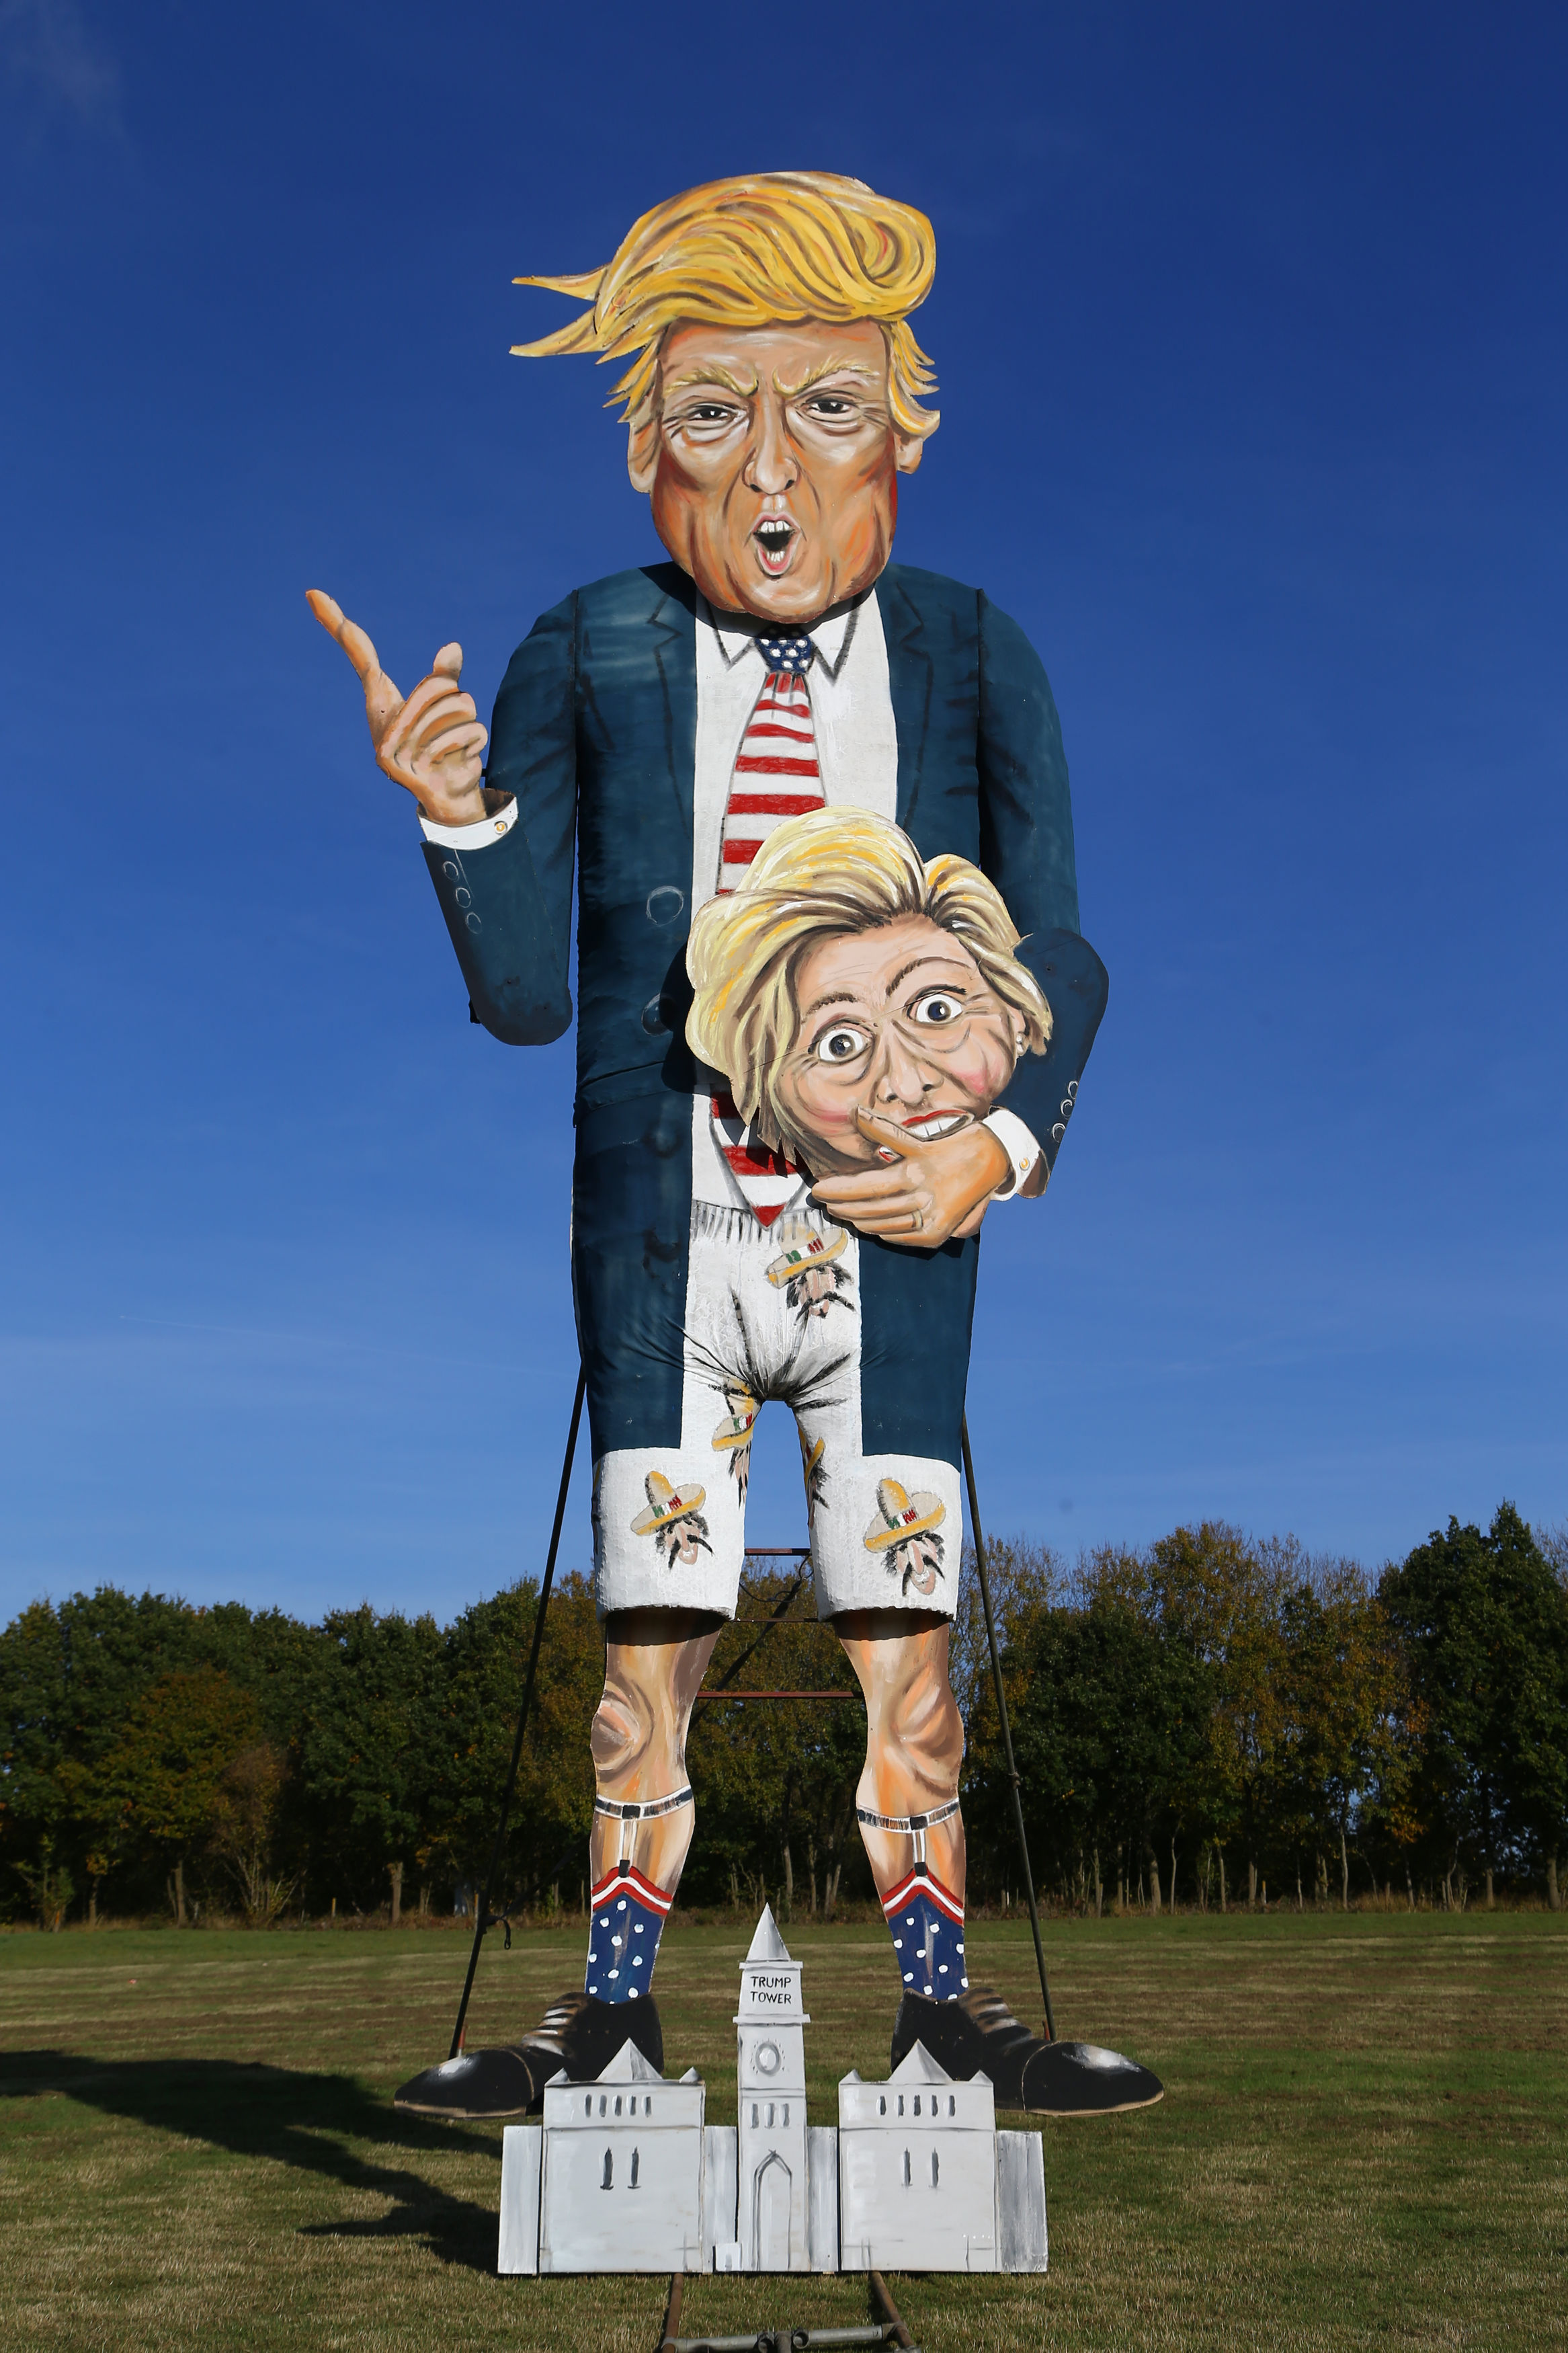 A view of the Edenbridge Bonfire Society celebrity guy which has been unveiled as US Presidential hopeful Donald Trump in Edenbridge, Kent, in 2016